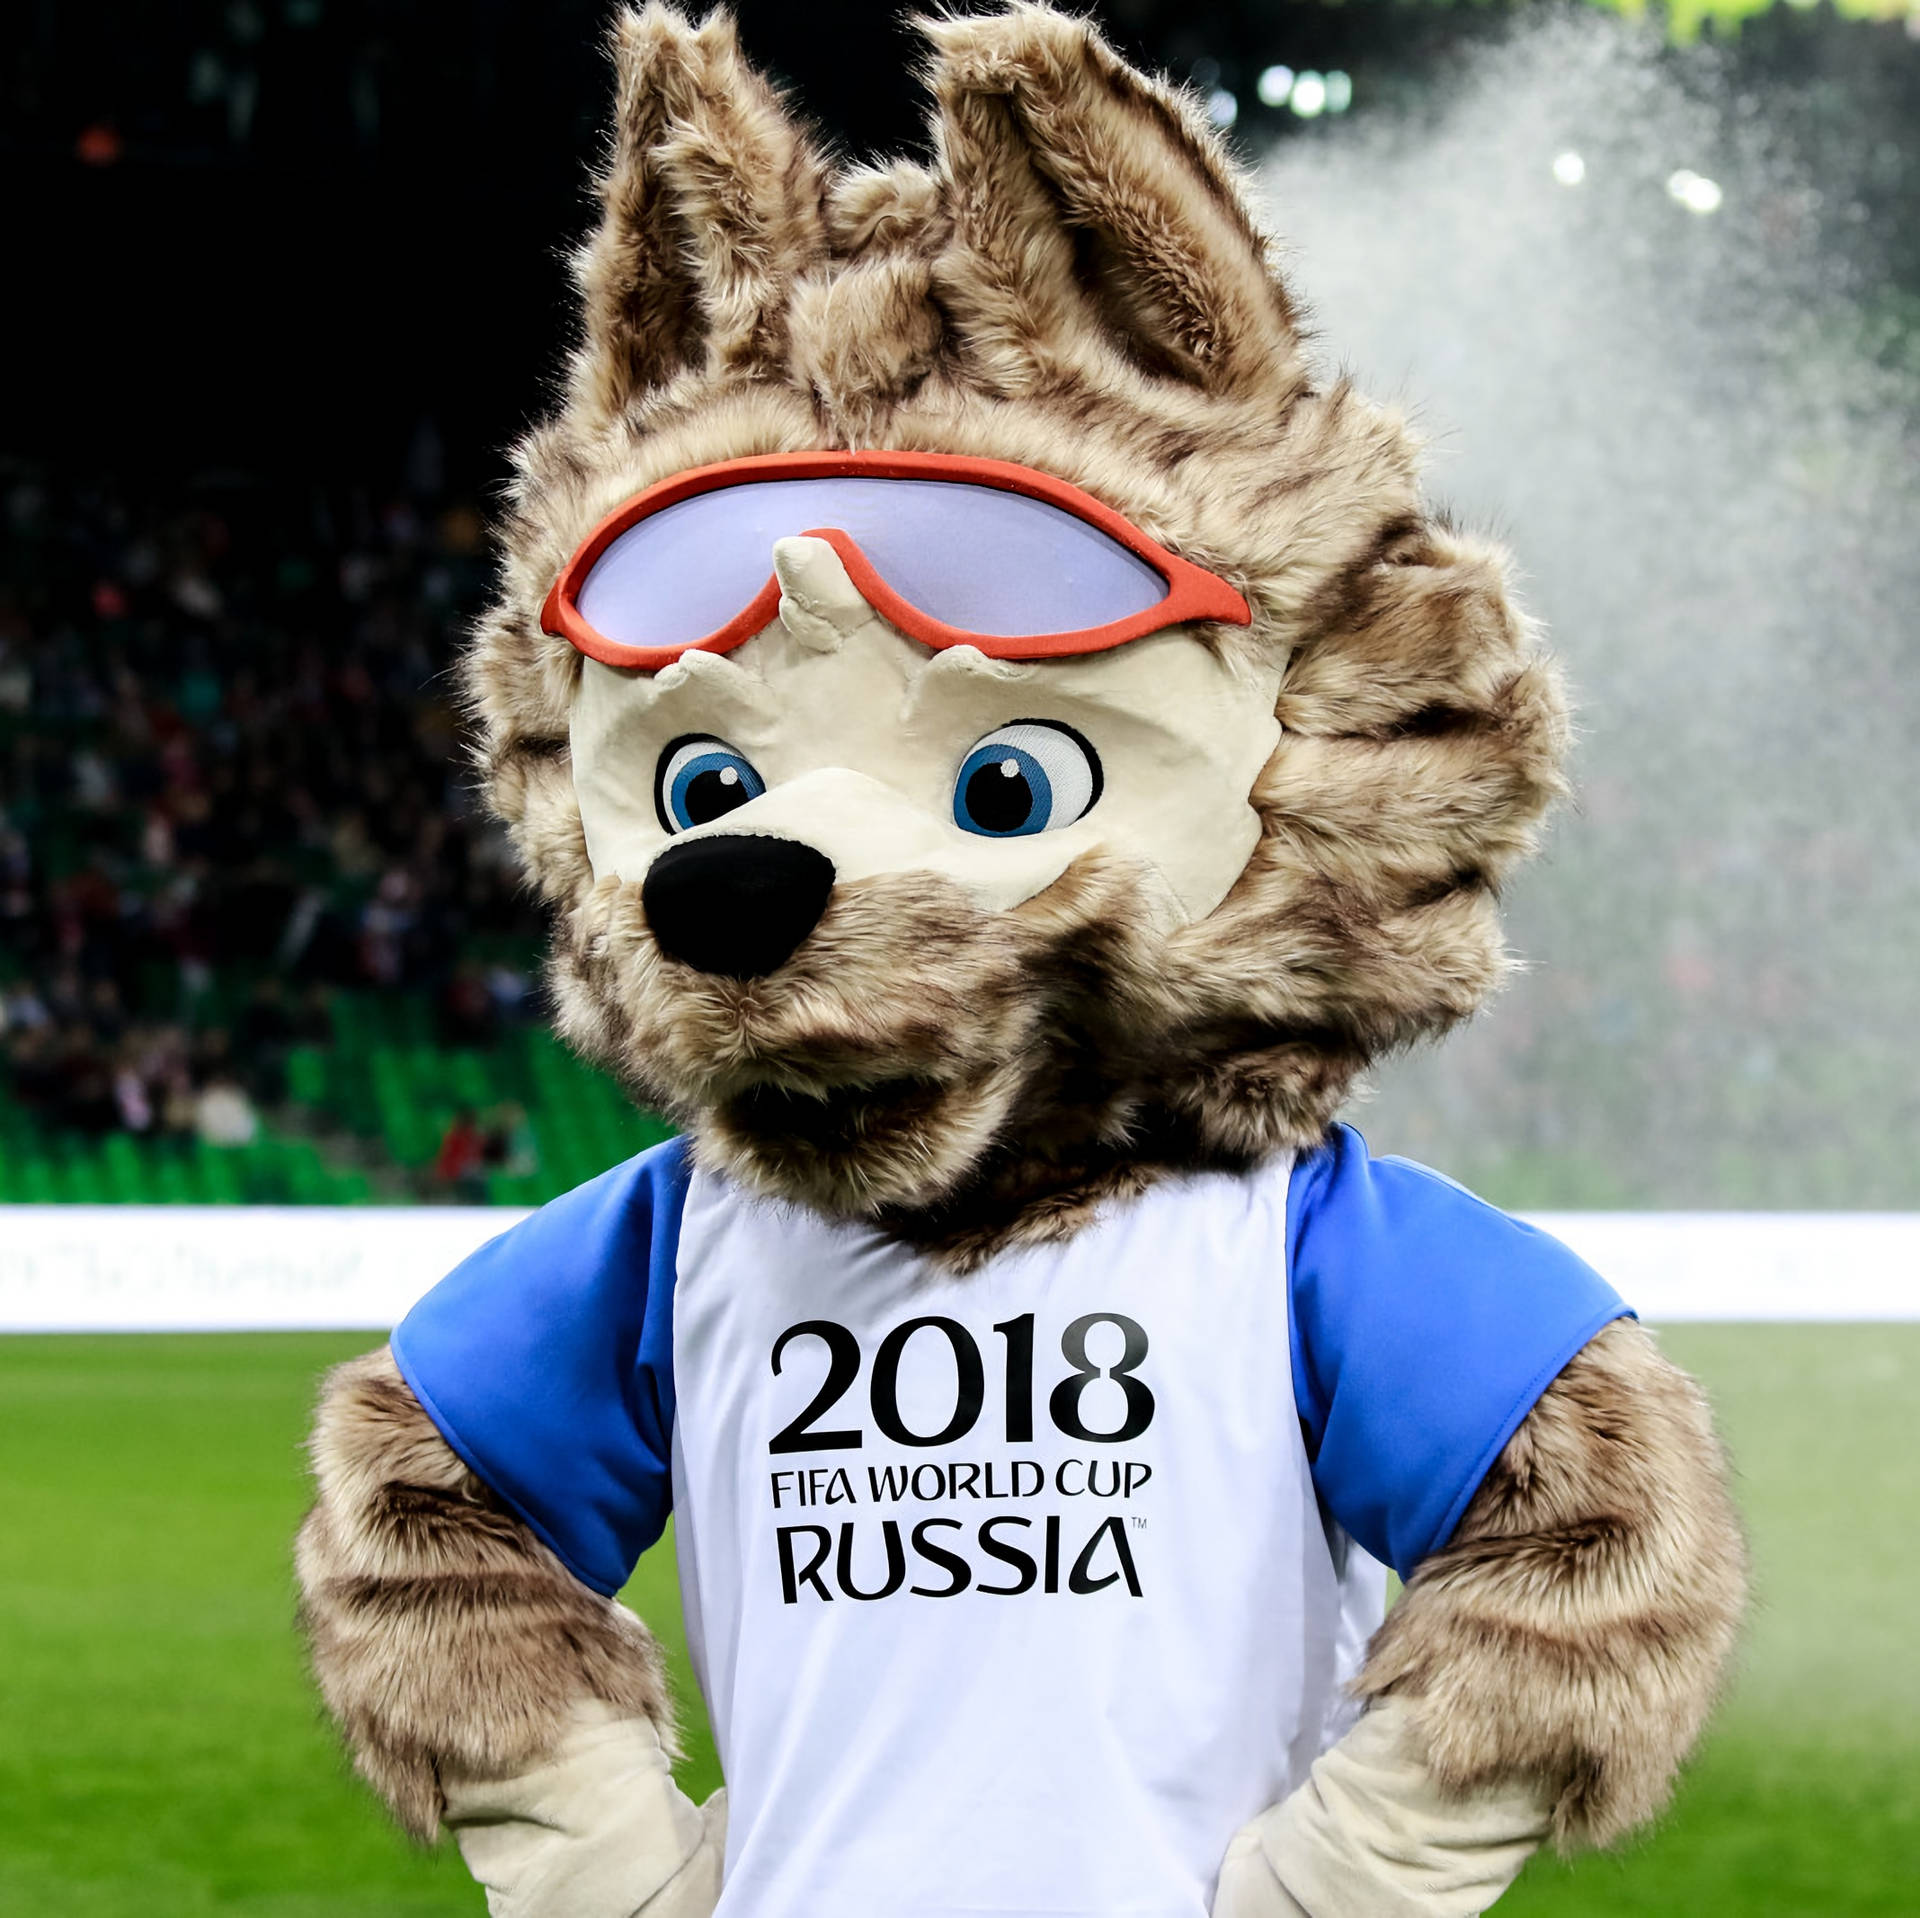 Russian World Cup Mascot 2018 Background